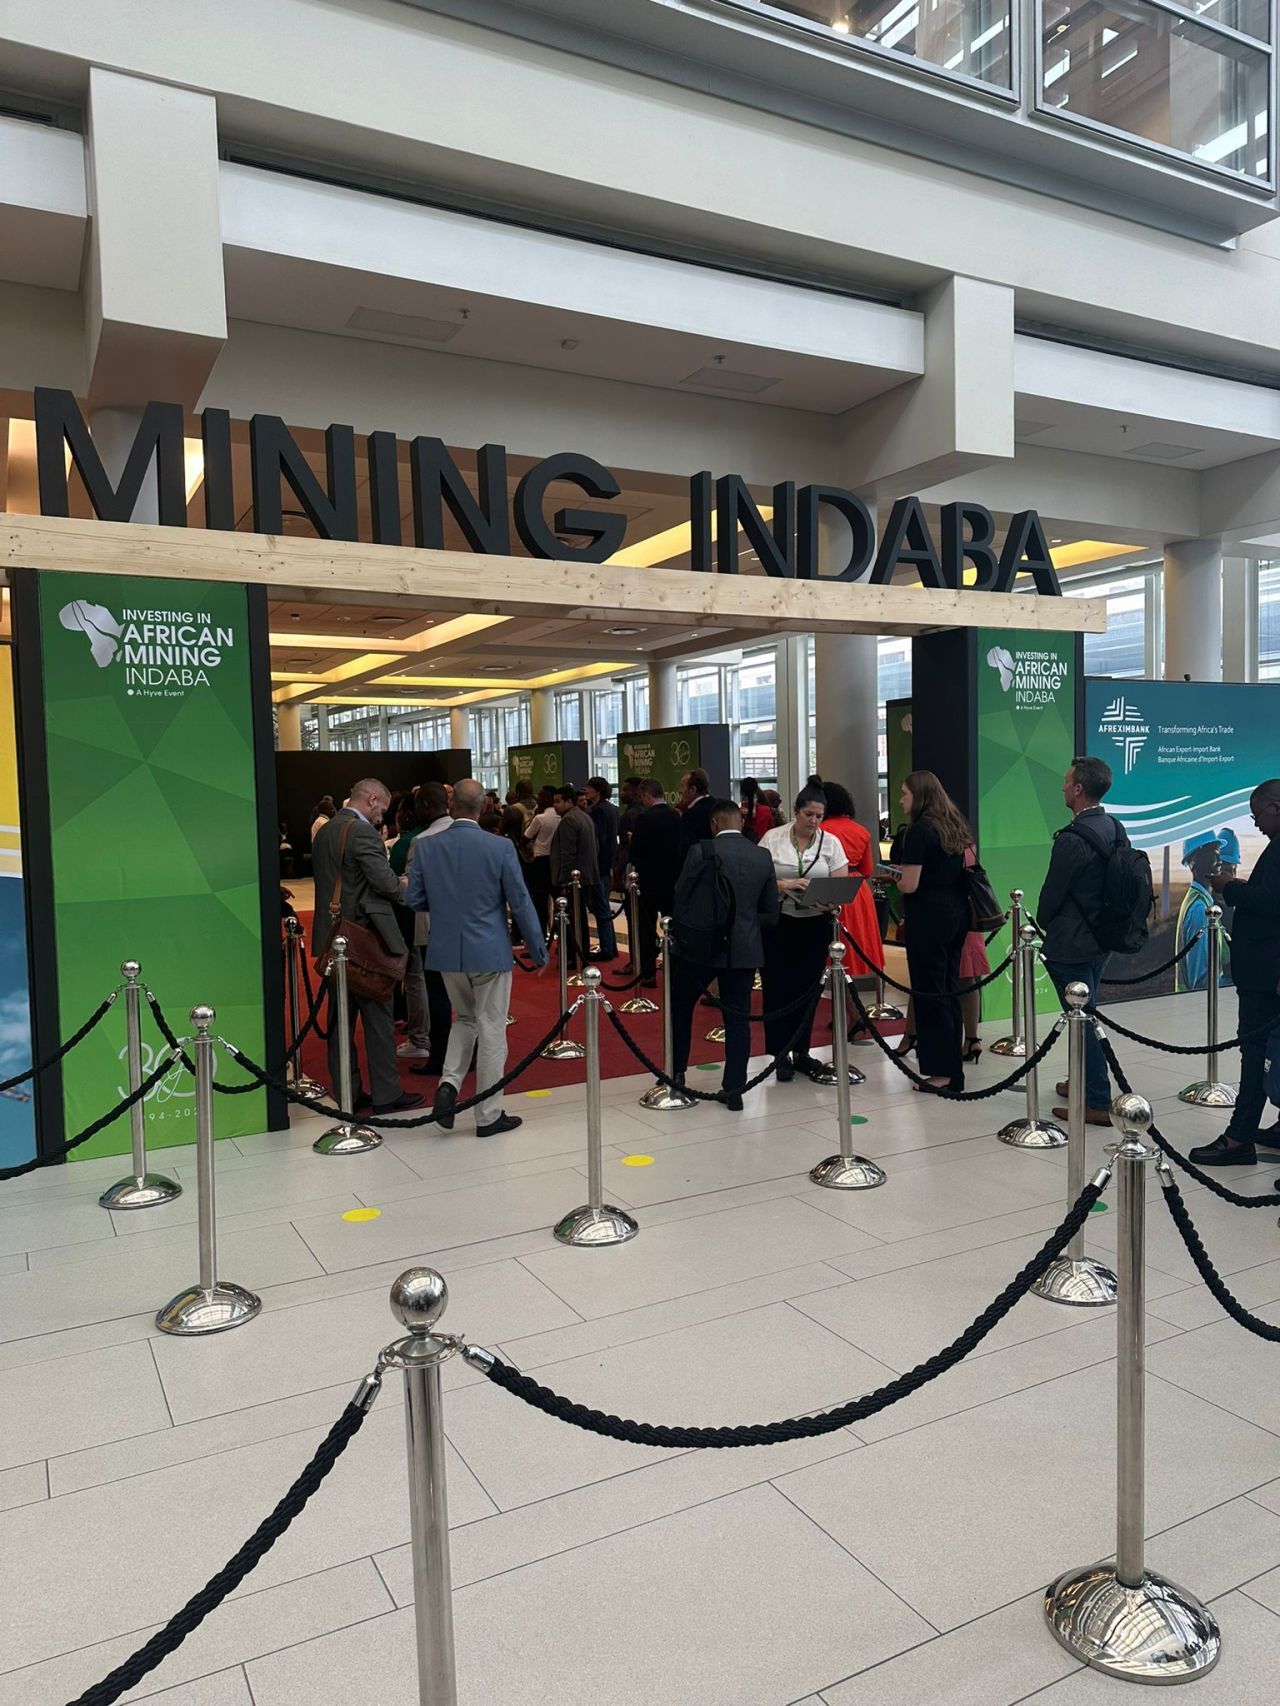 Image of the entrance to the mining indaba event